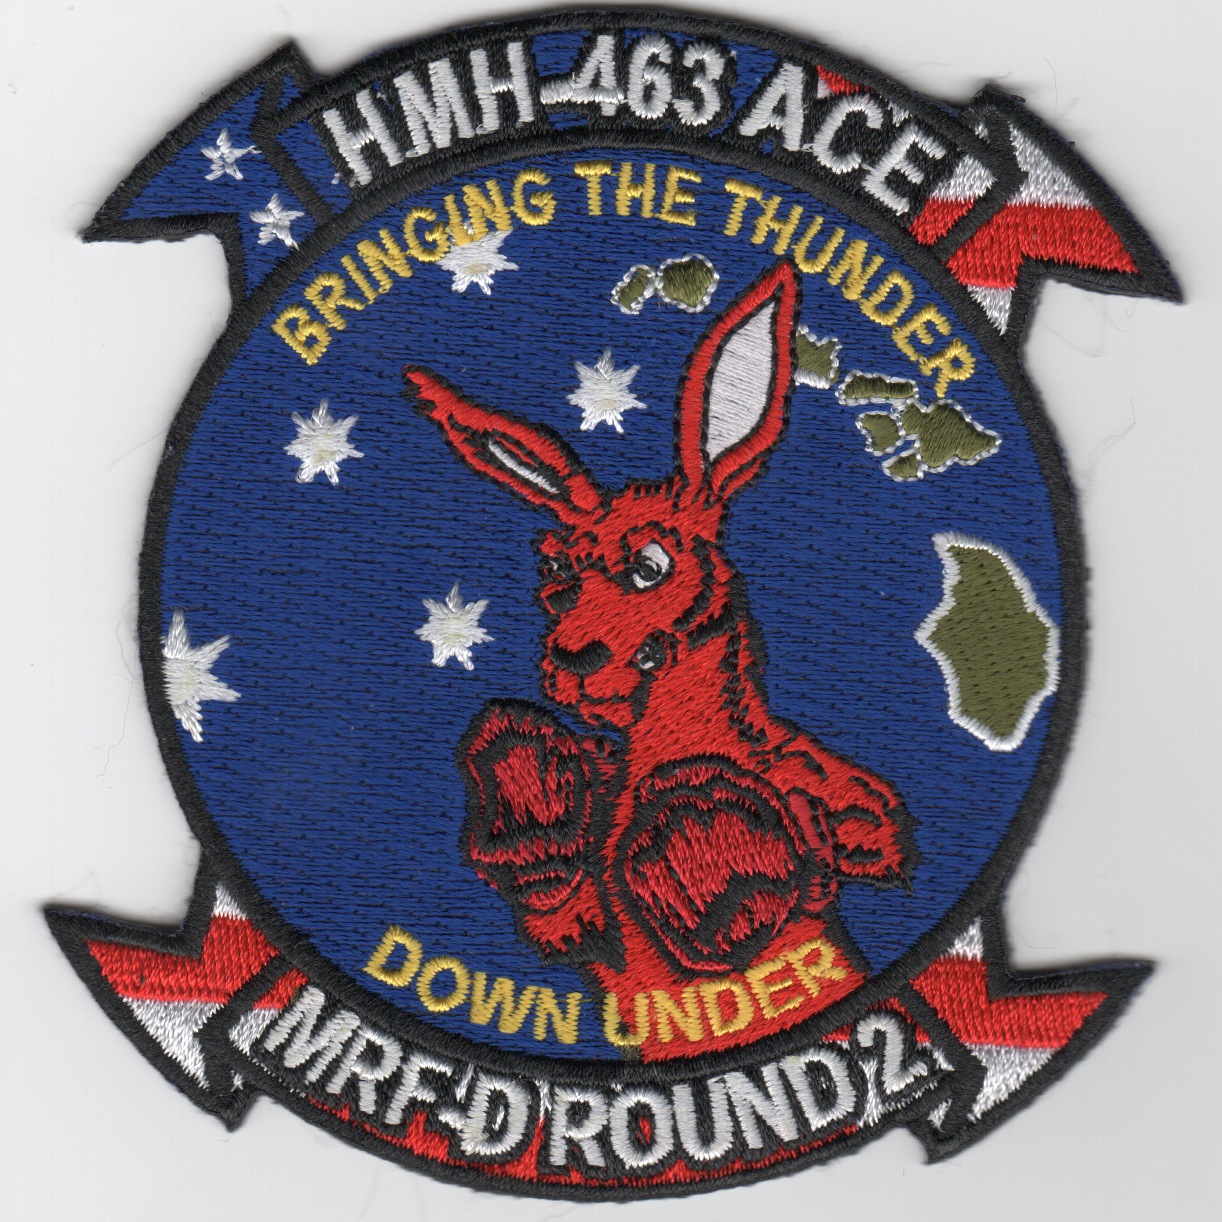 HMH-463 'Thunder Down Under' Patch